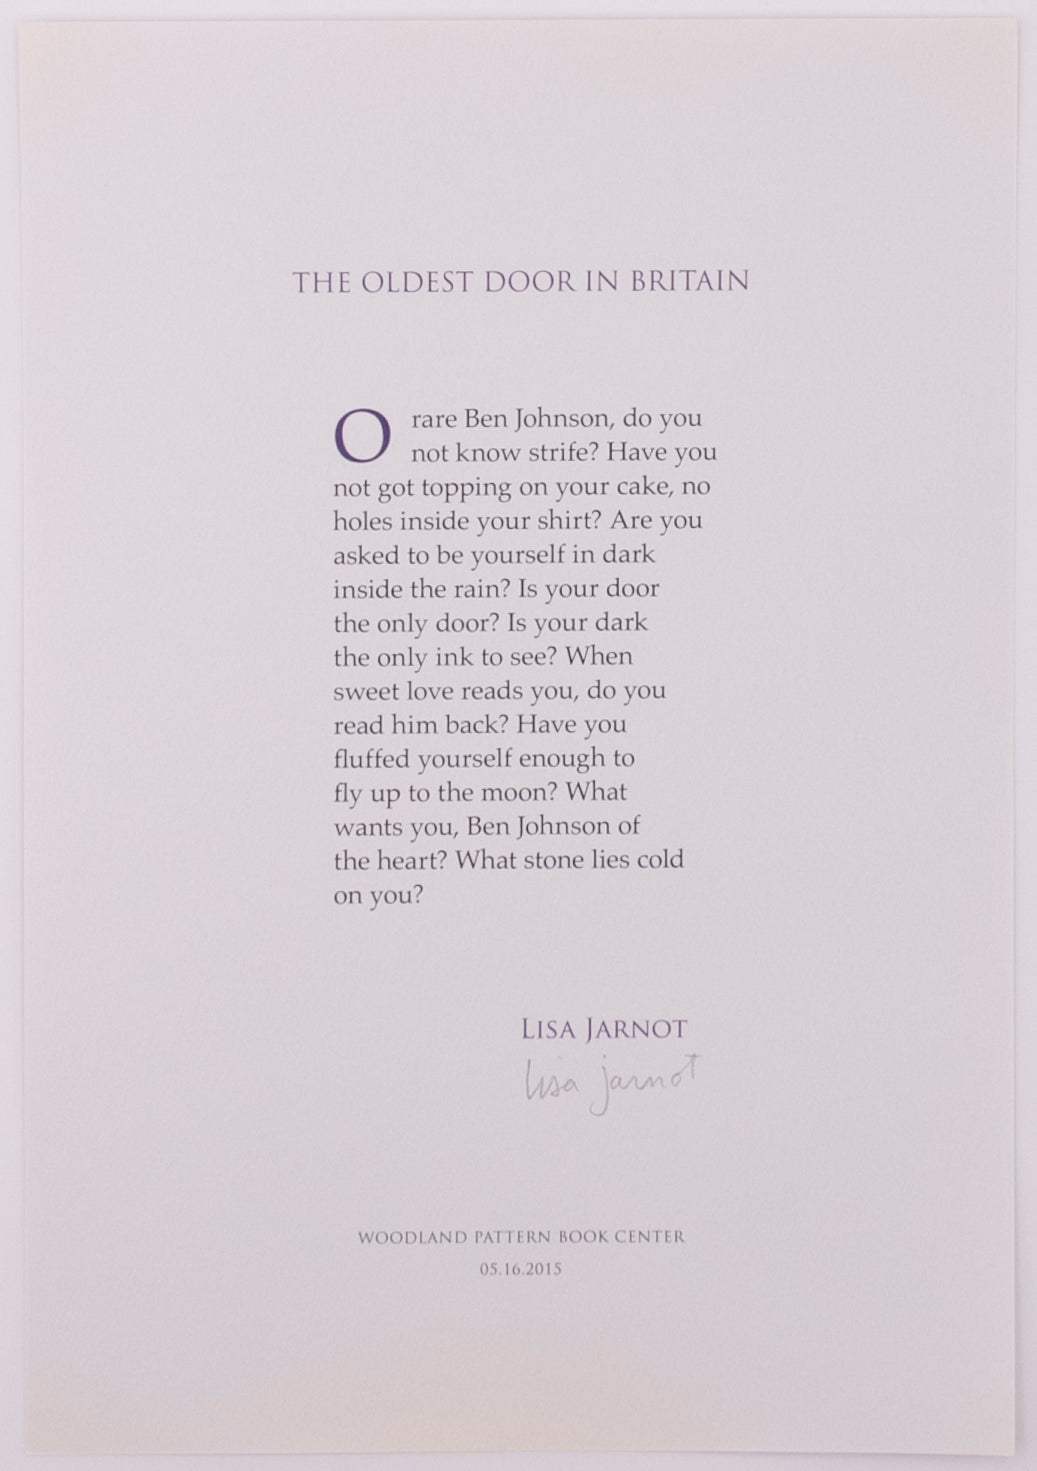 Broadside titled The oldest door in Britain by Lisa Jarnot. Blue text on blue paper.